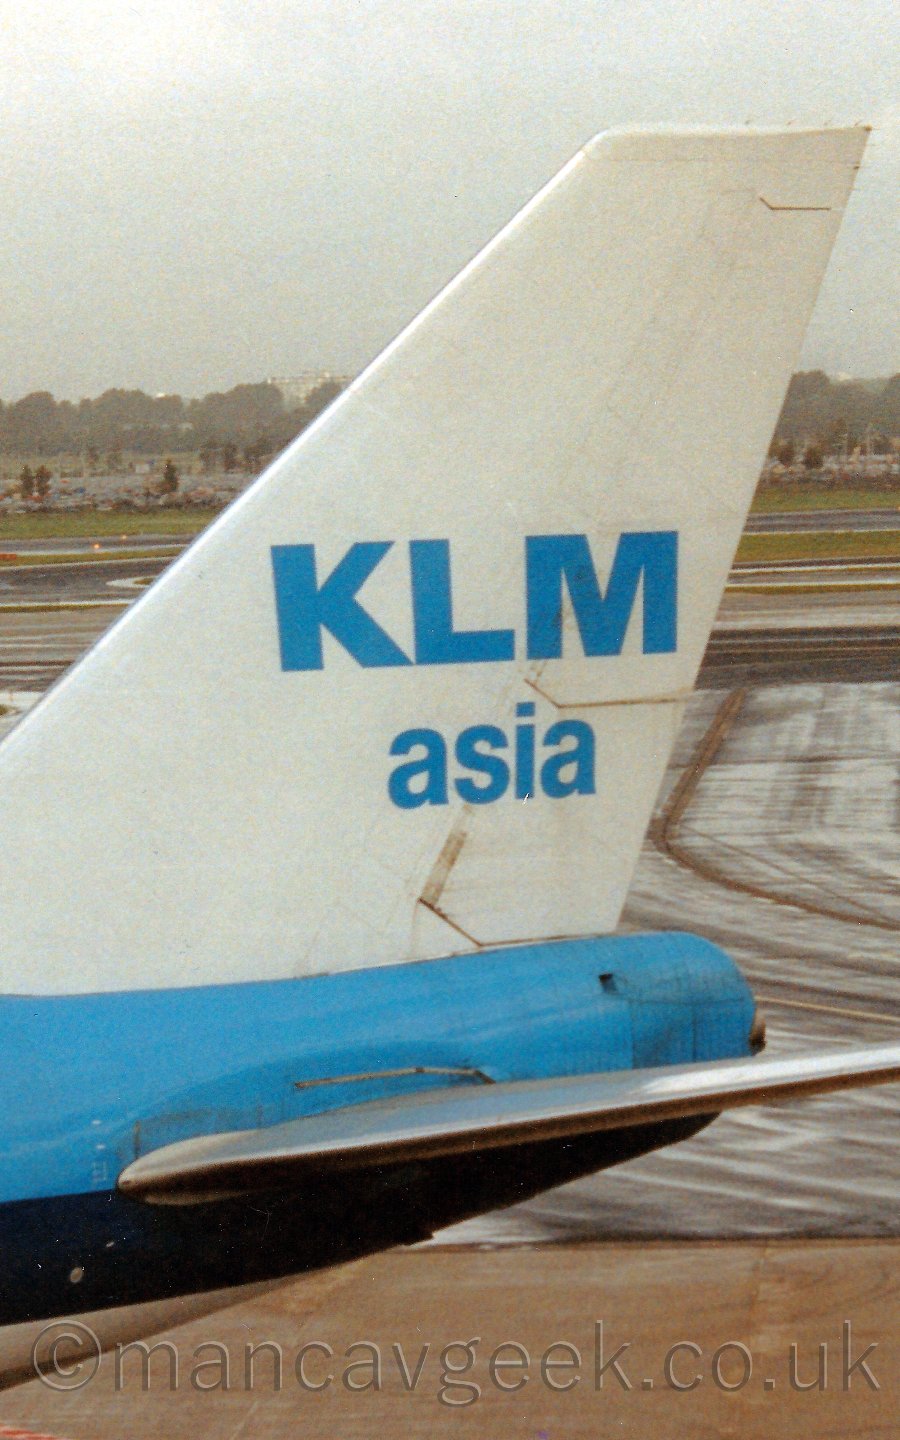 Close up of the tail of a very large 4 engined jet airliner, facing to the left. The plane is mostly blue, with a white tail, which has blue "KLM Asia" titles. behind is a view across the airfield, to trees and buildings vanishing in to haze.